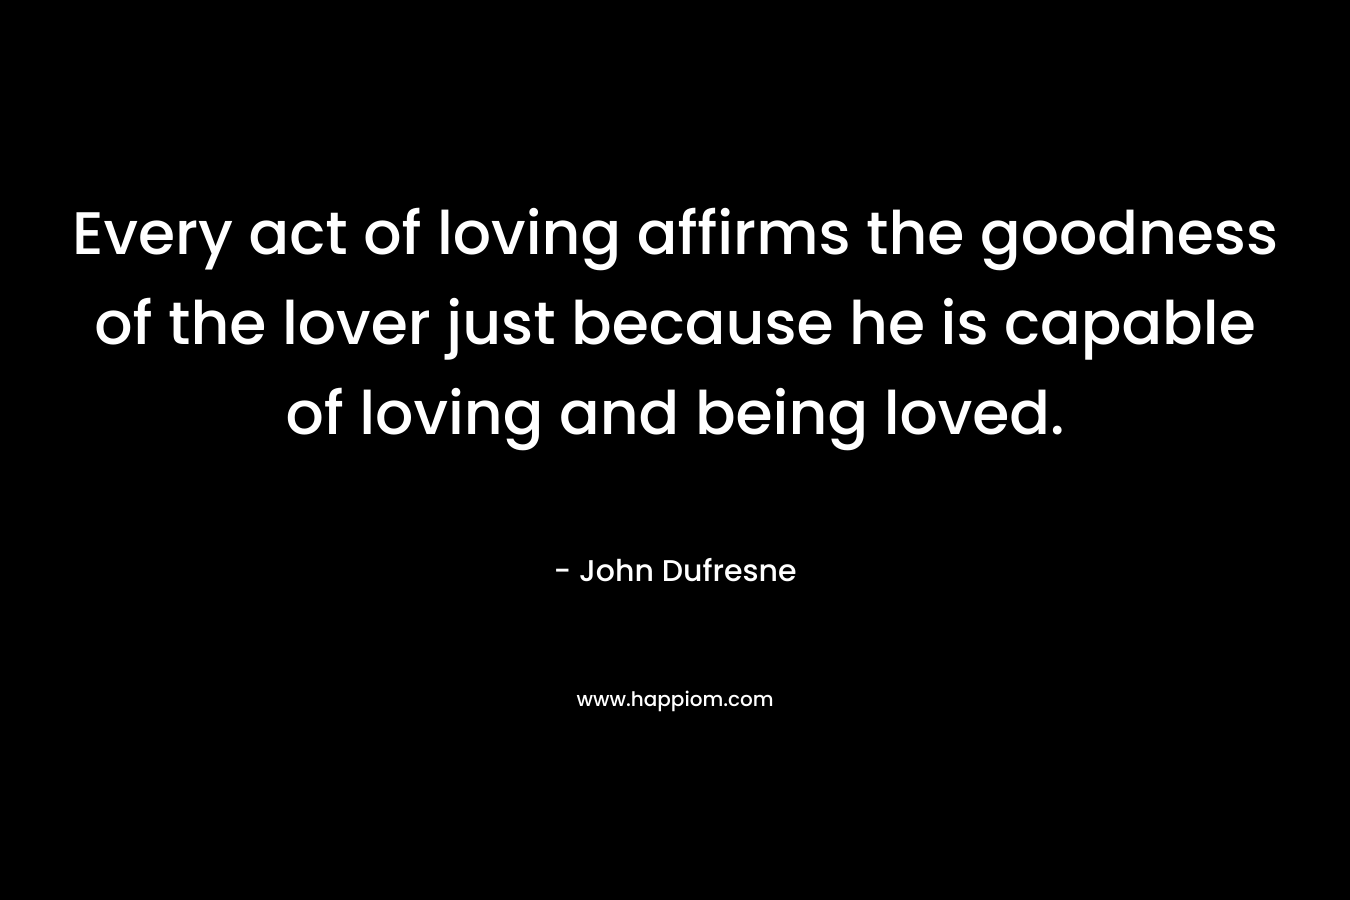 Every act of loving affirms the goodness of the lover just because he is capable of loving and being loved. – John Dufresne